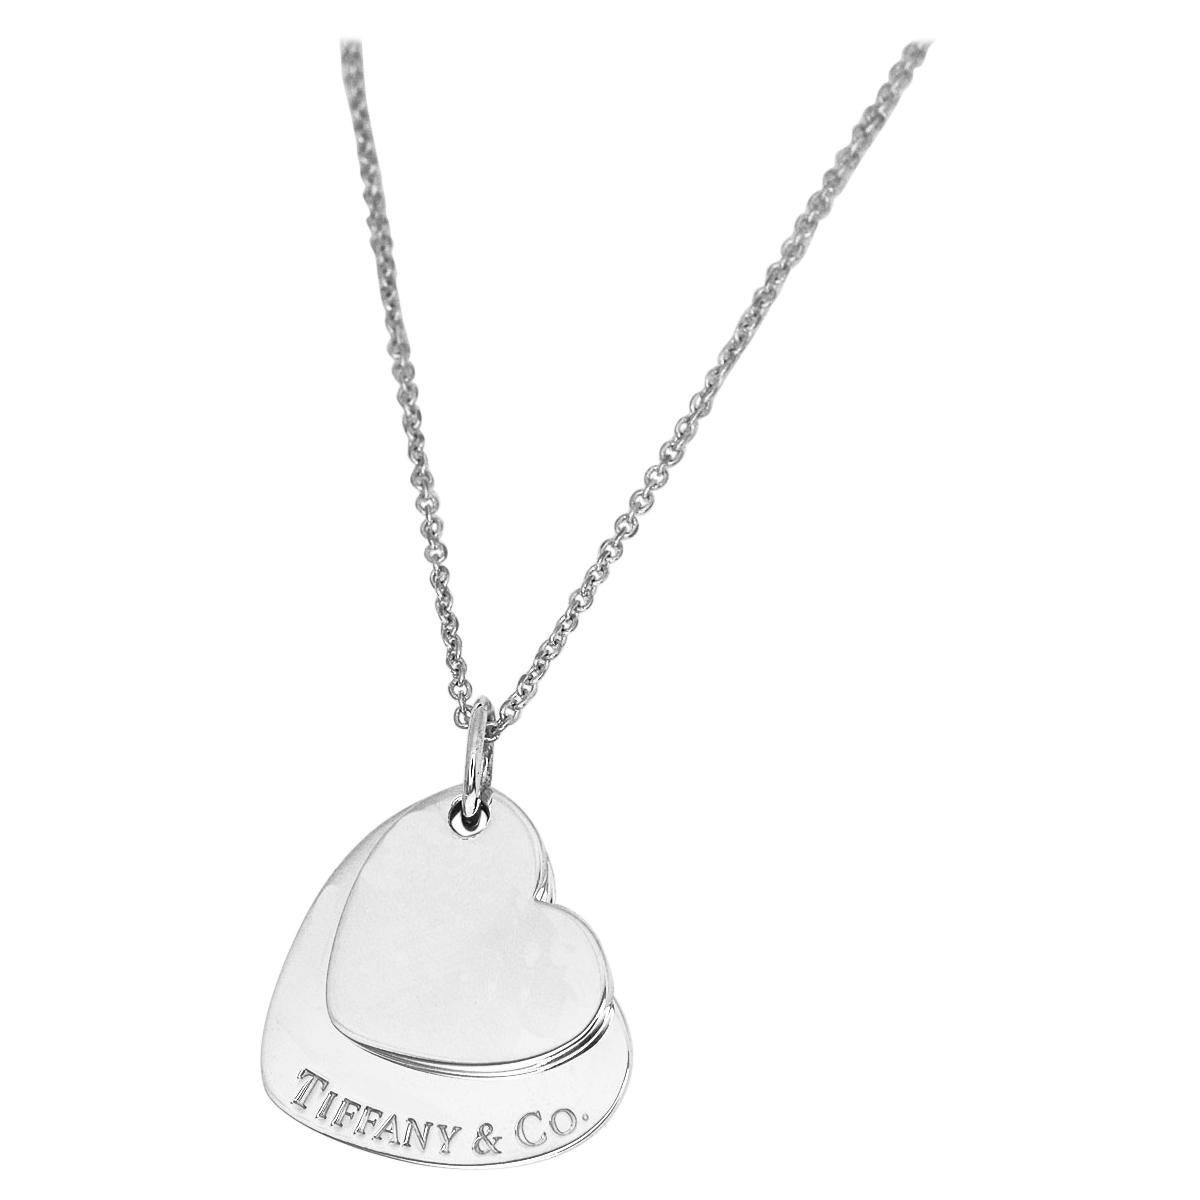 tiffany two heart necklace